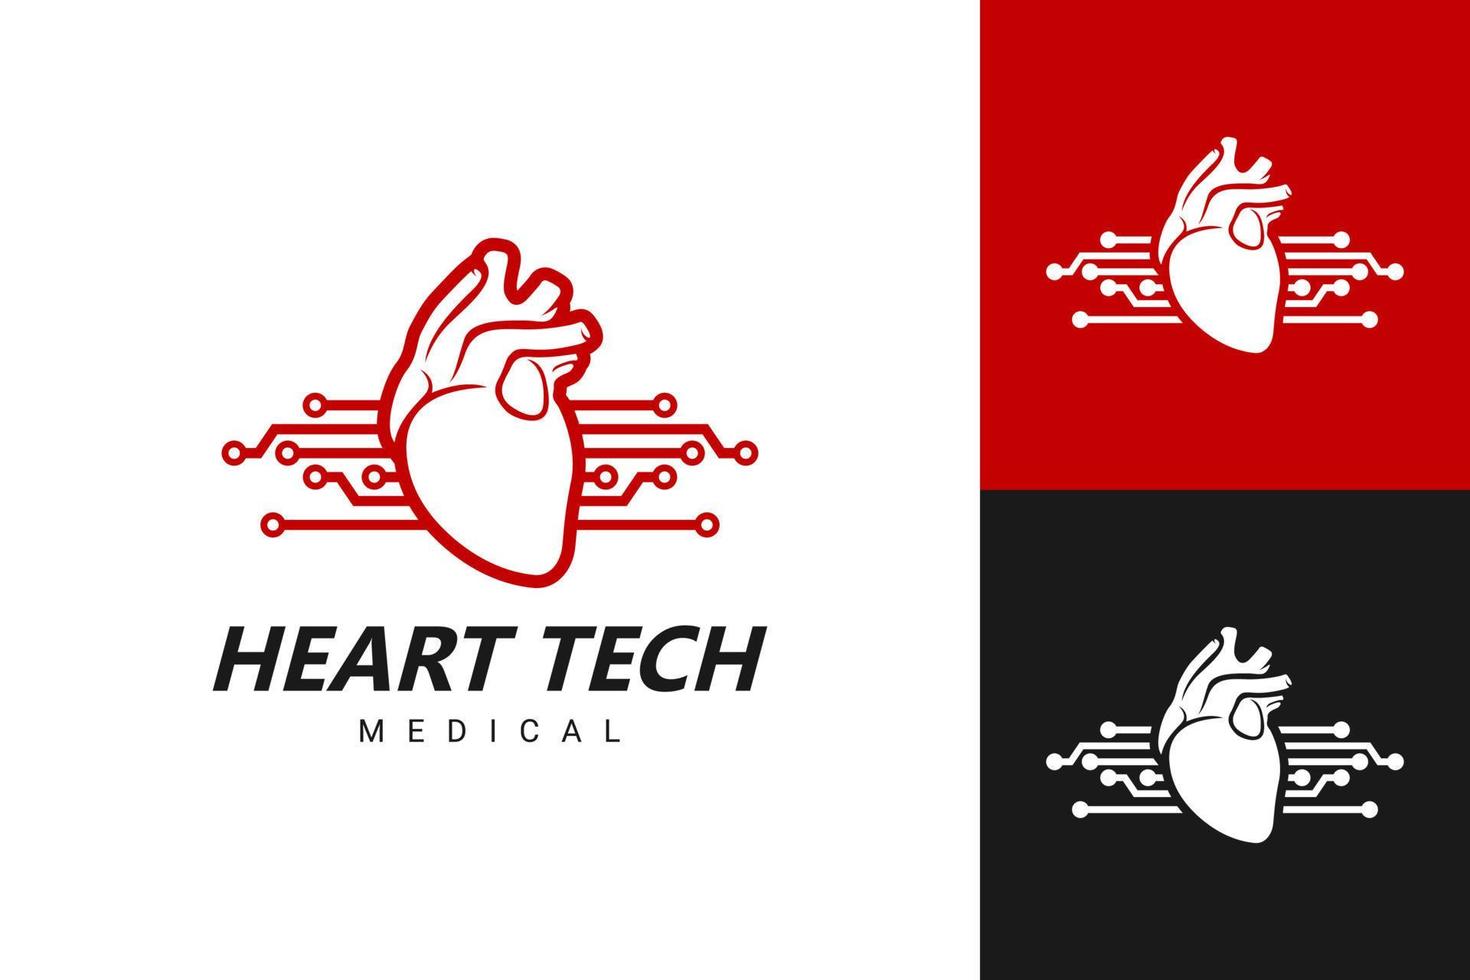 Illustration Vector Graphic of Heart Tech Logo. Perfect to use for Health Sector Company